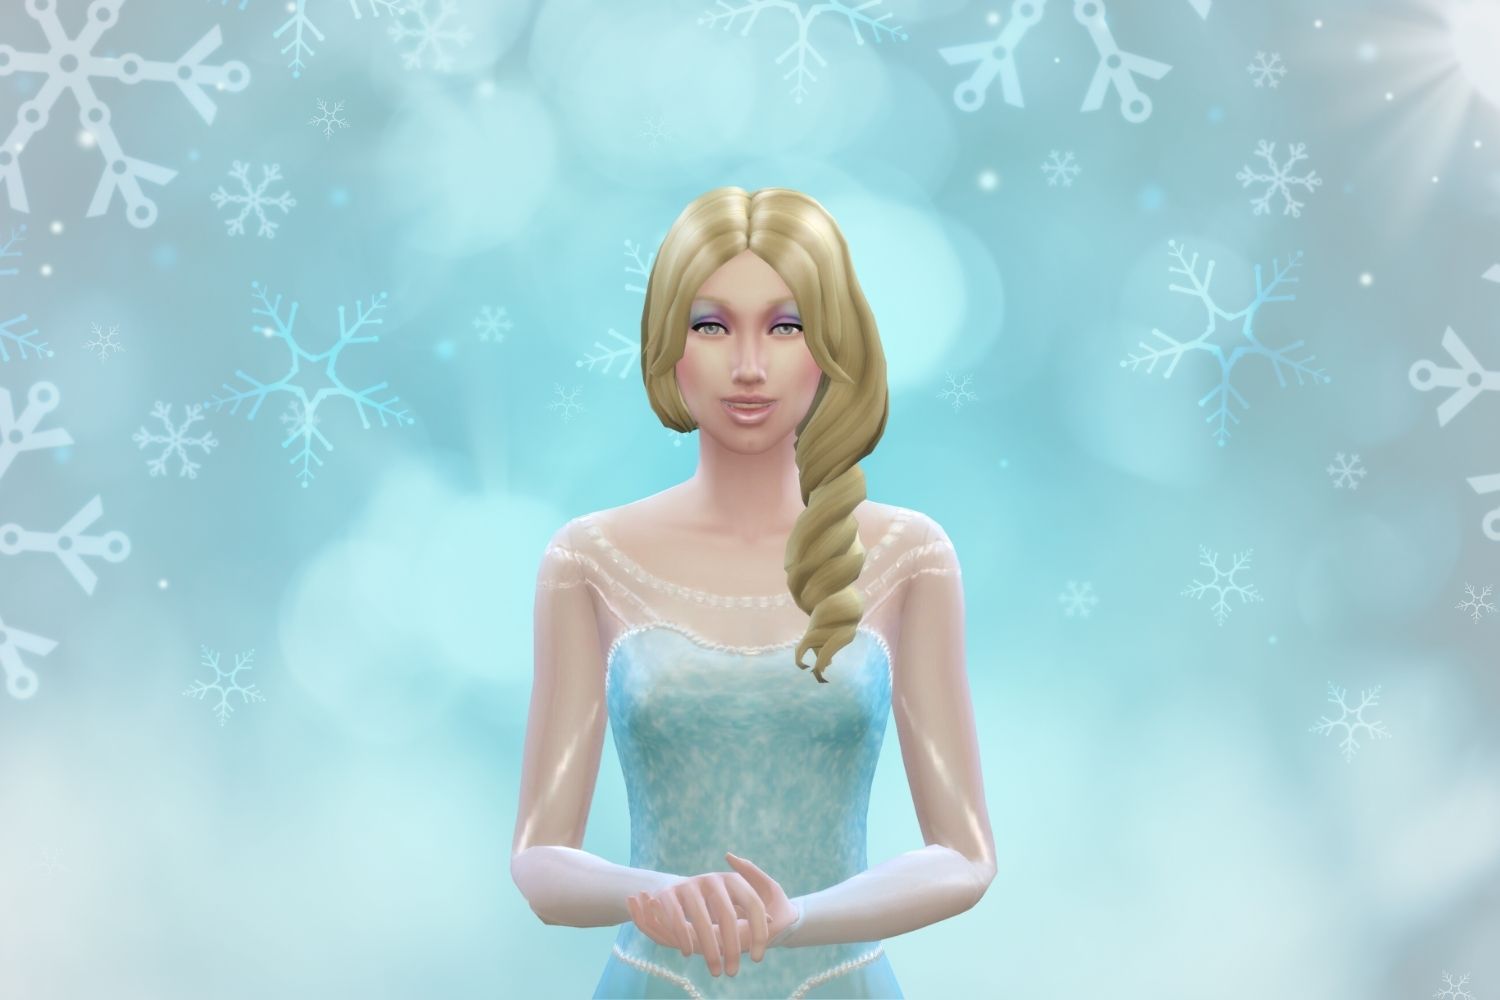 A Sim that resembles Elsa from Disney's Frozen stands in front of an icy background.